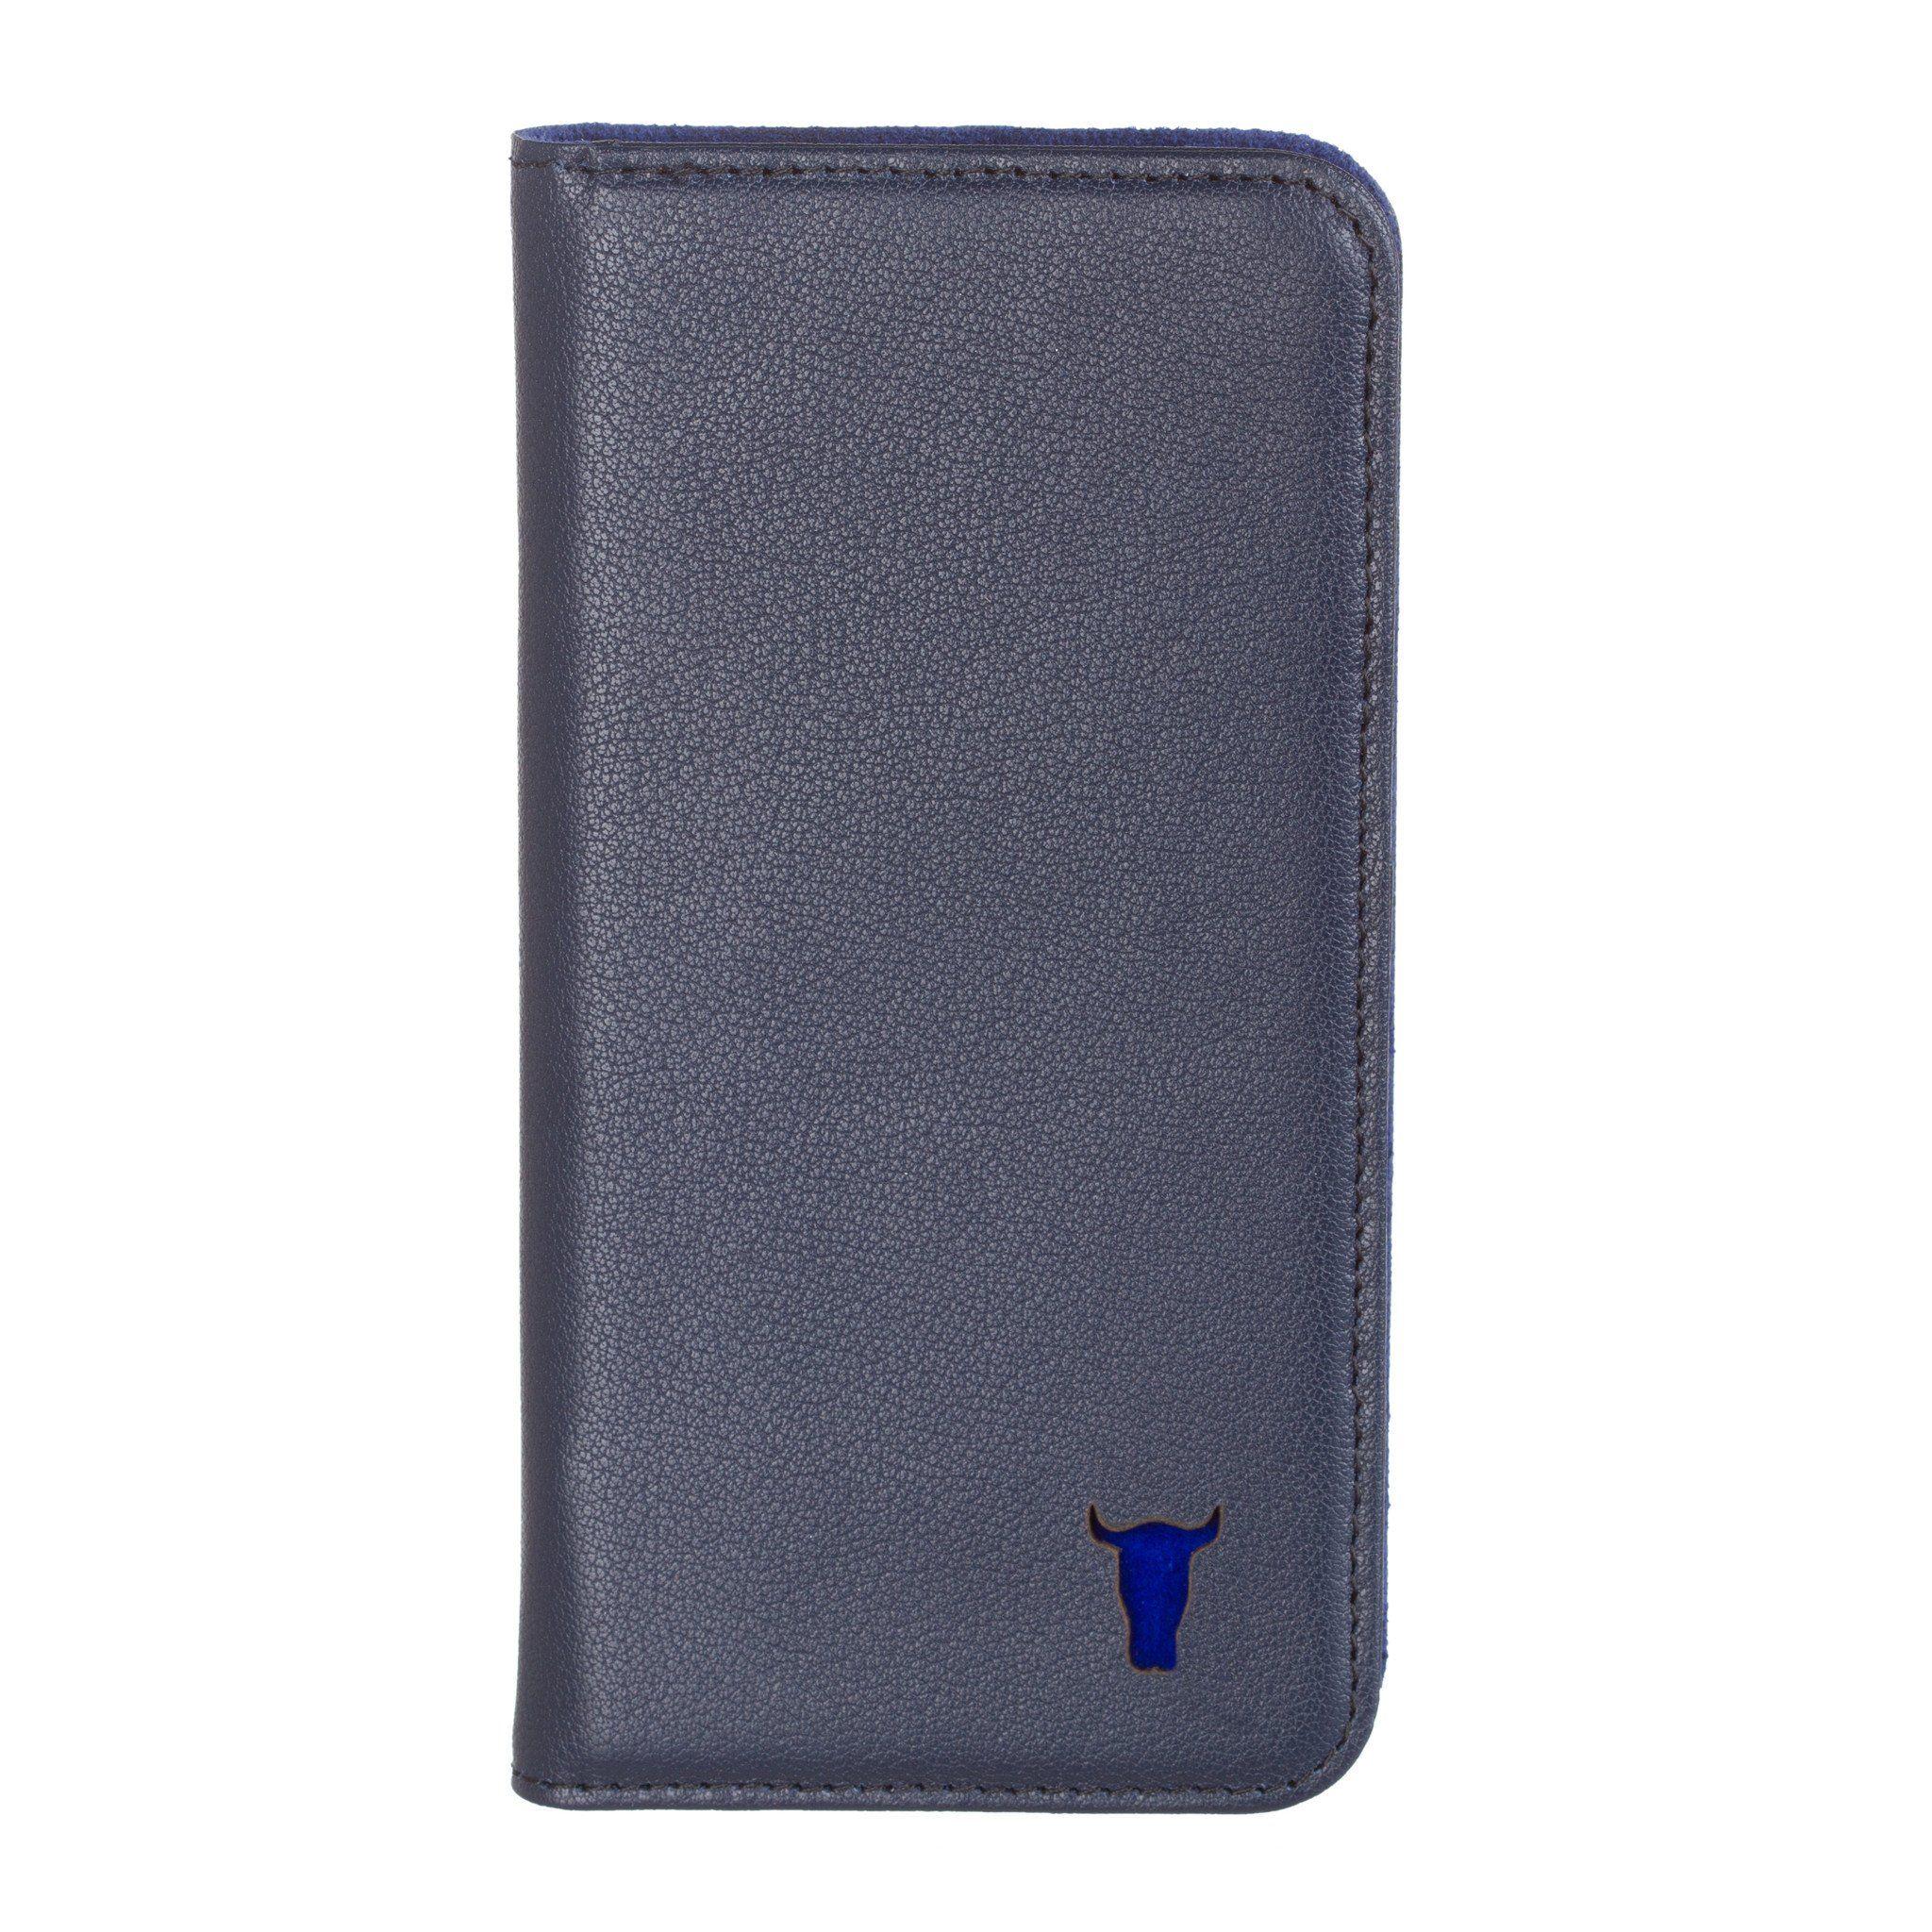 Blue Samsung Galaxy Logo - Samsung Galaxy S7 Edge Navy Blue Leather Case, with Stand Function